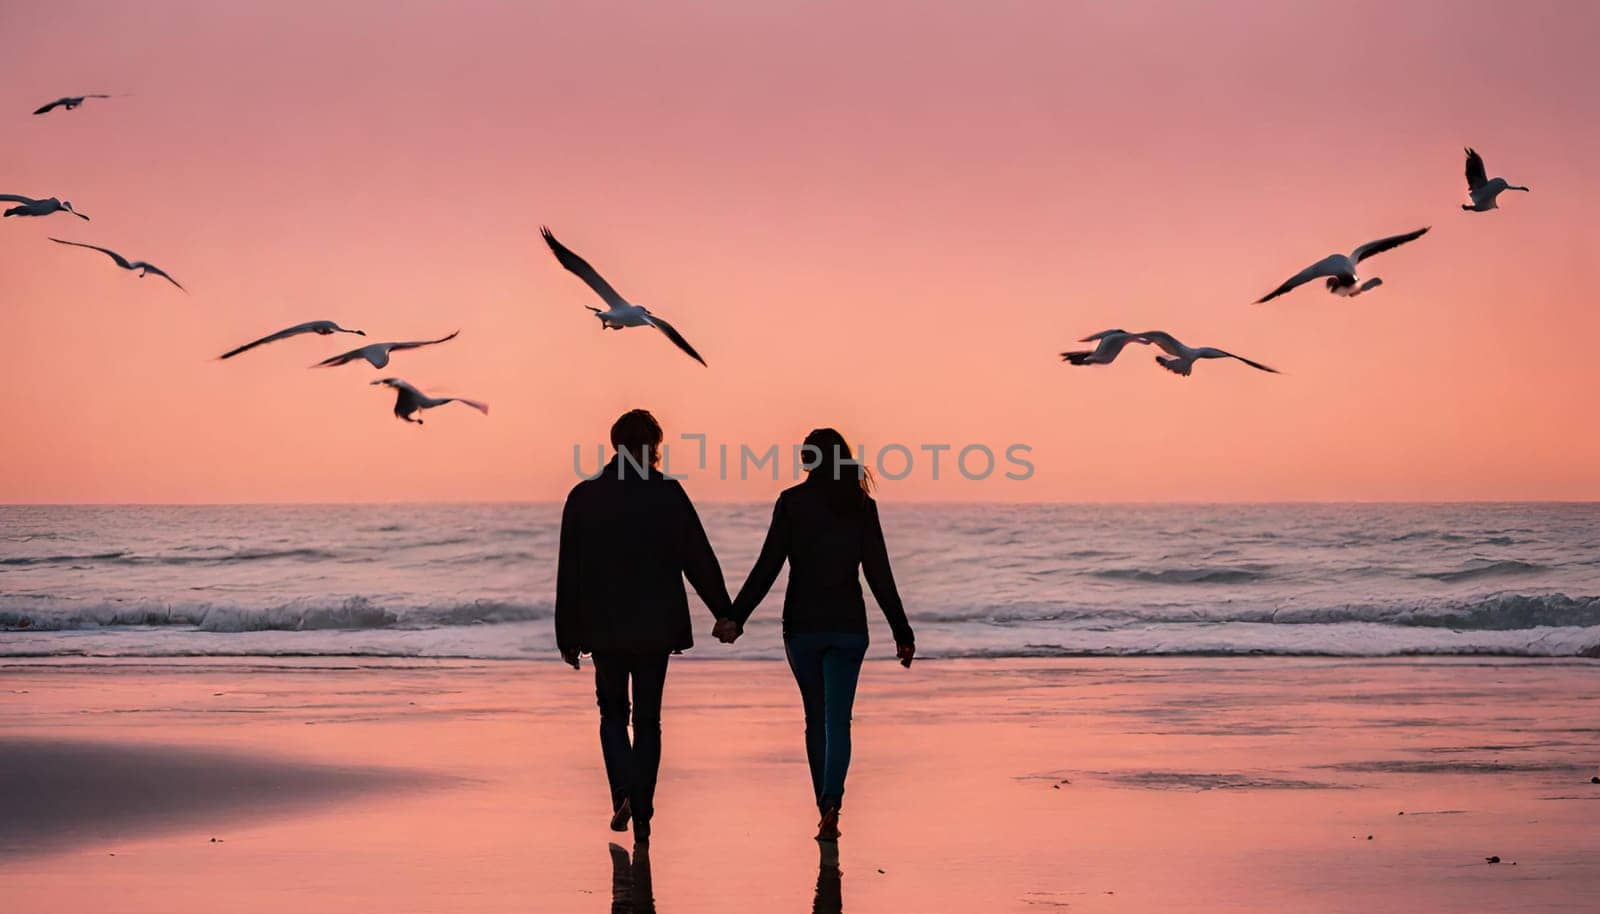 A couple holding hands and walking on a beach at sunset. The sky is orange and pink, and the ocean is calm. There are some seagulls flying in the distance. Happy Valentine's Day